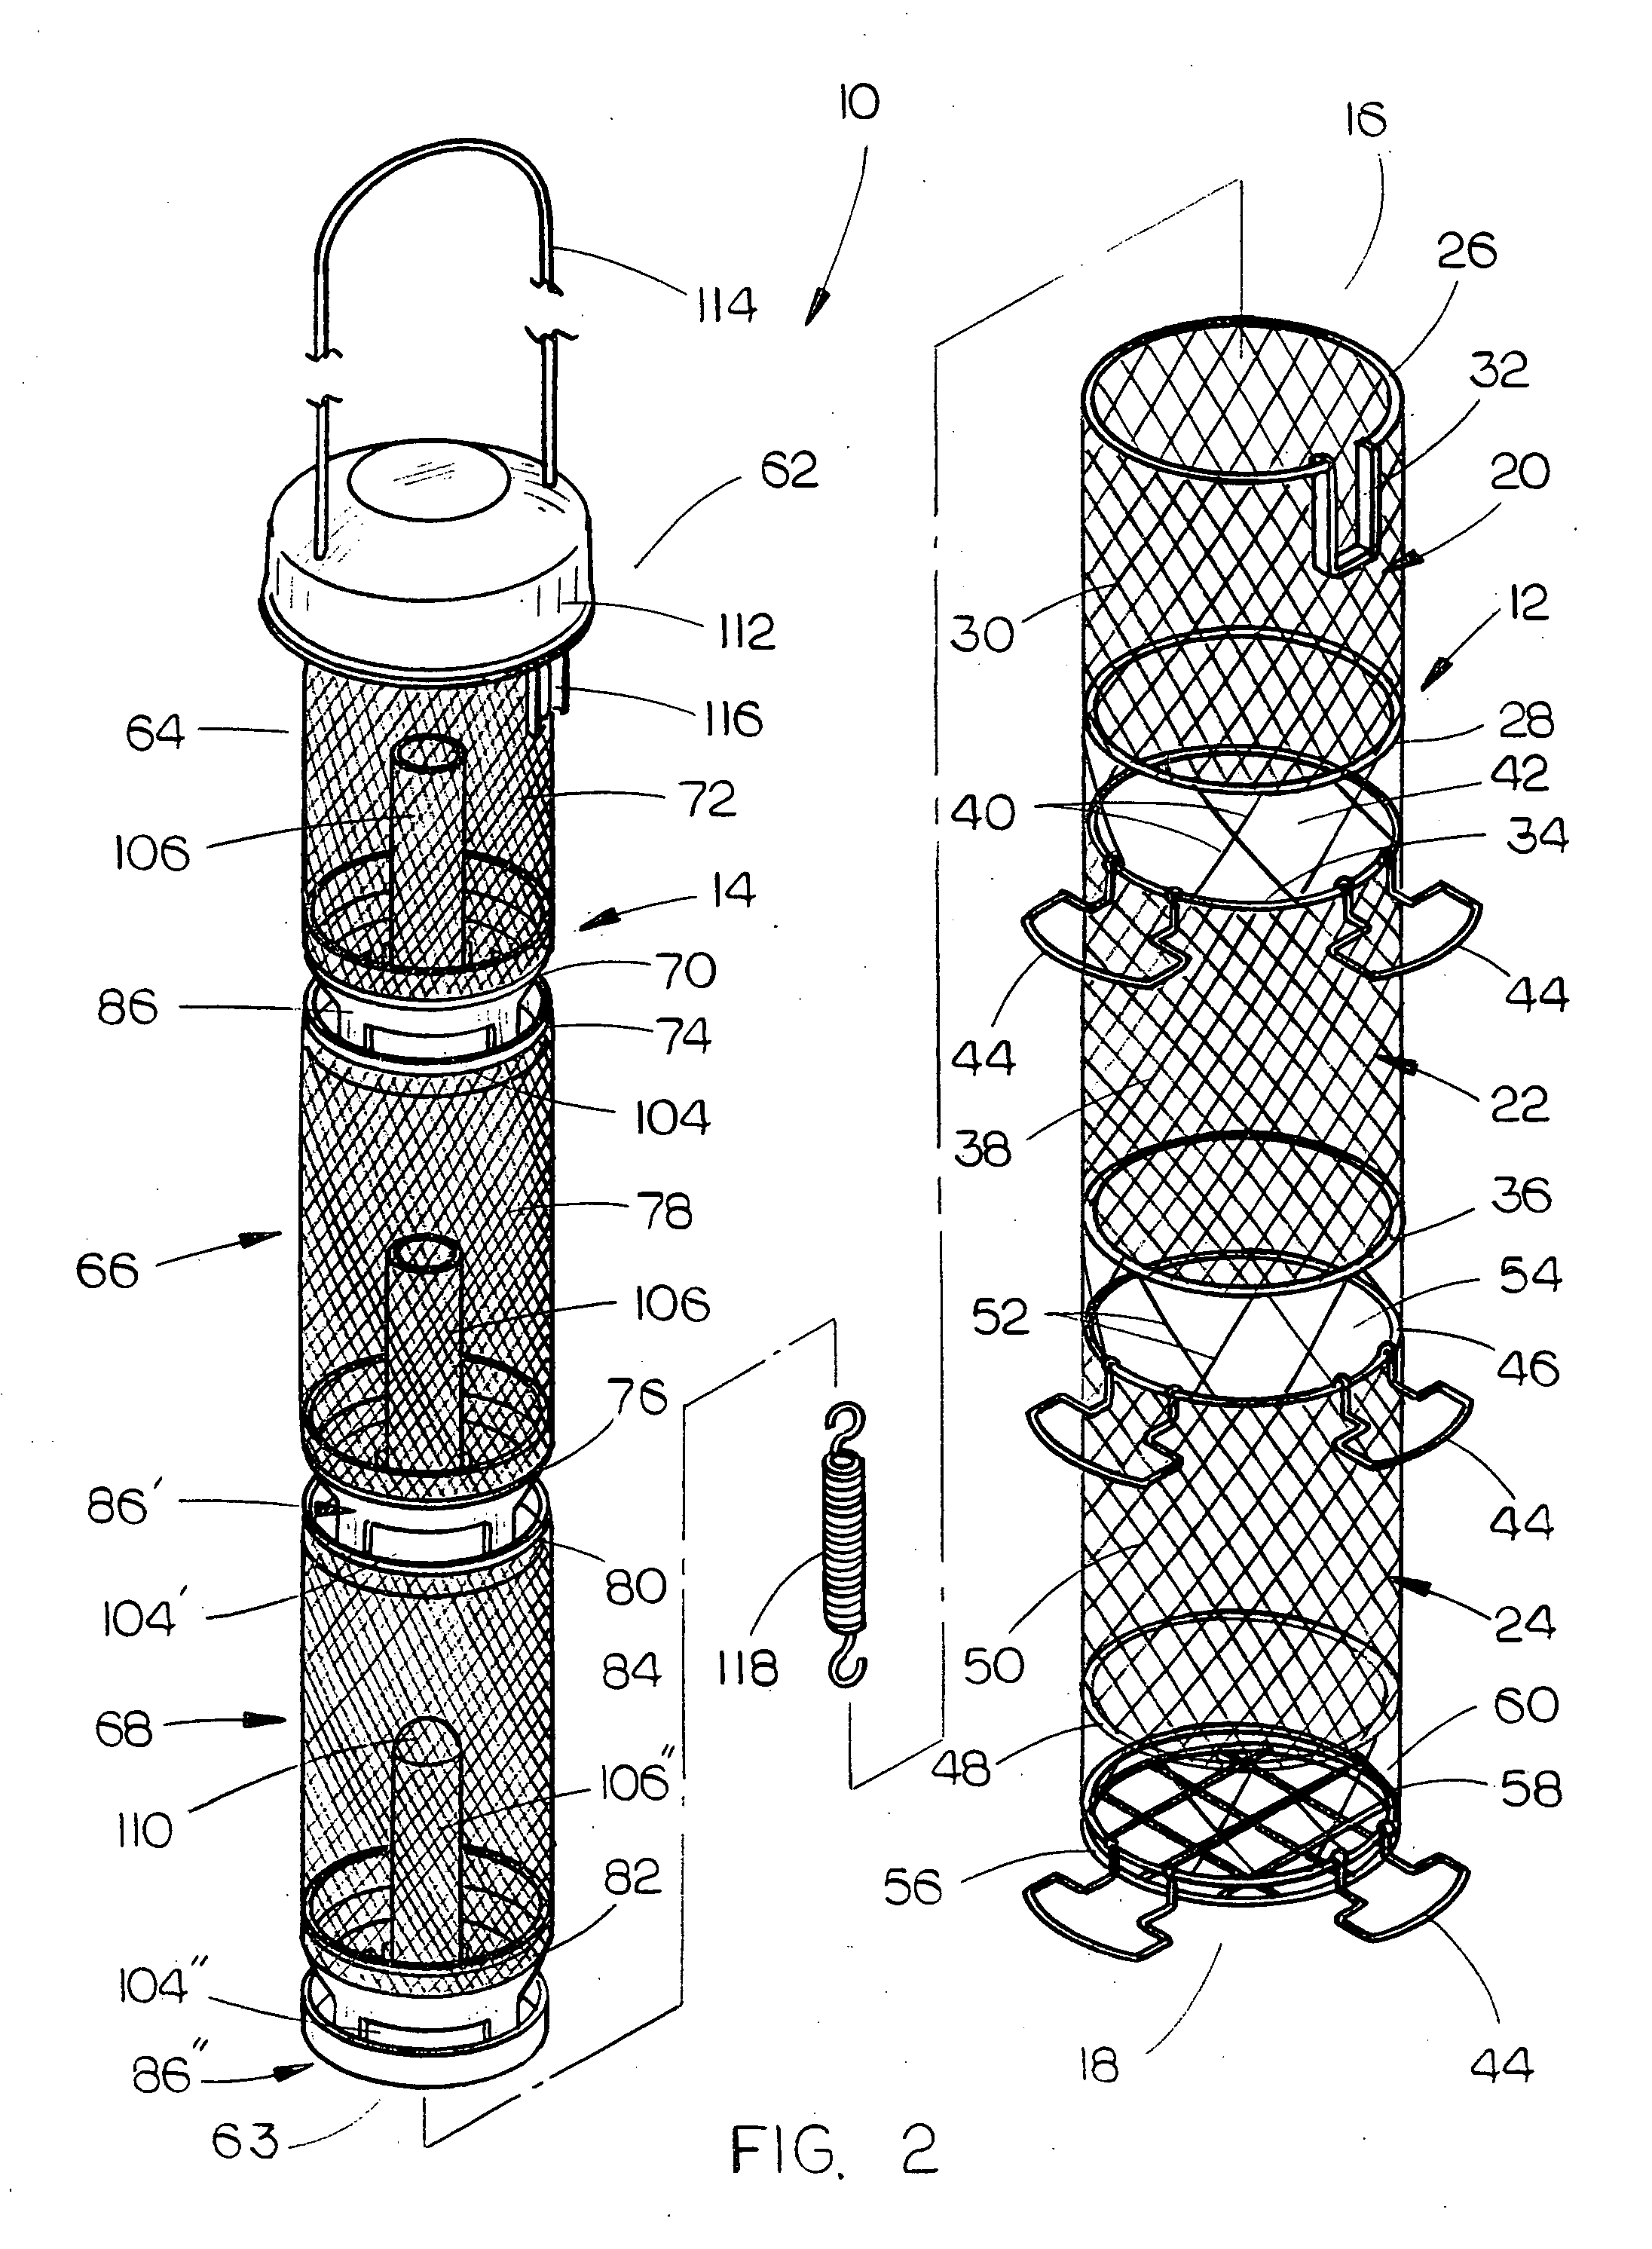 Squirrel-proof bird feeder and feed level control device